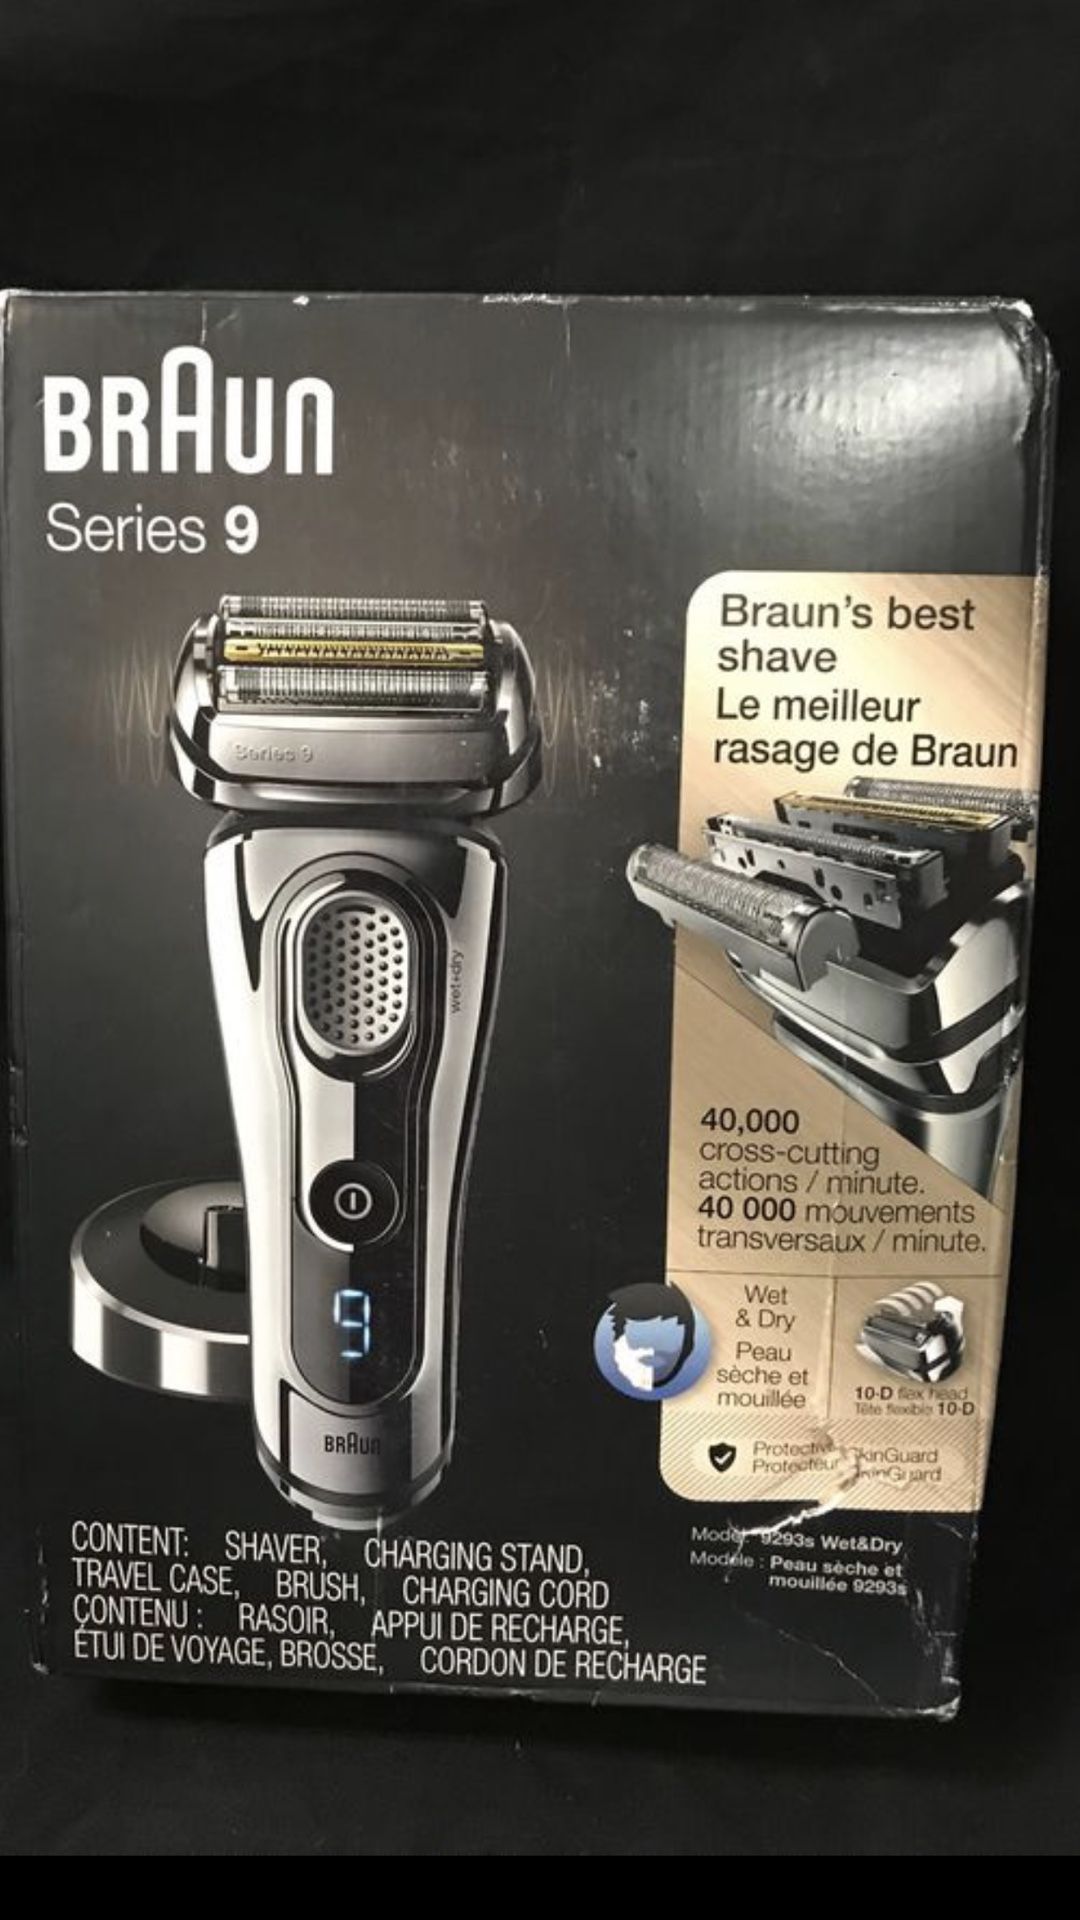 Braun Series 9 9293s Mens Electric Foil Shaver Wet & Dry Razor with Charging Stand and Travel Case.